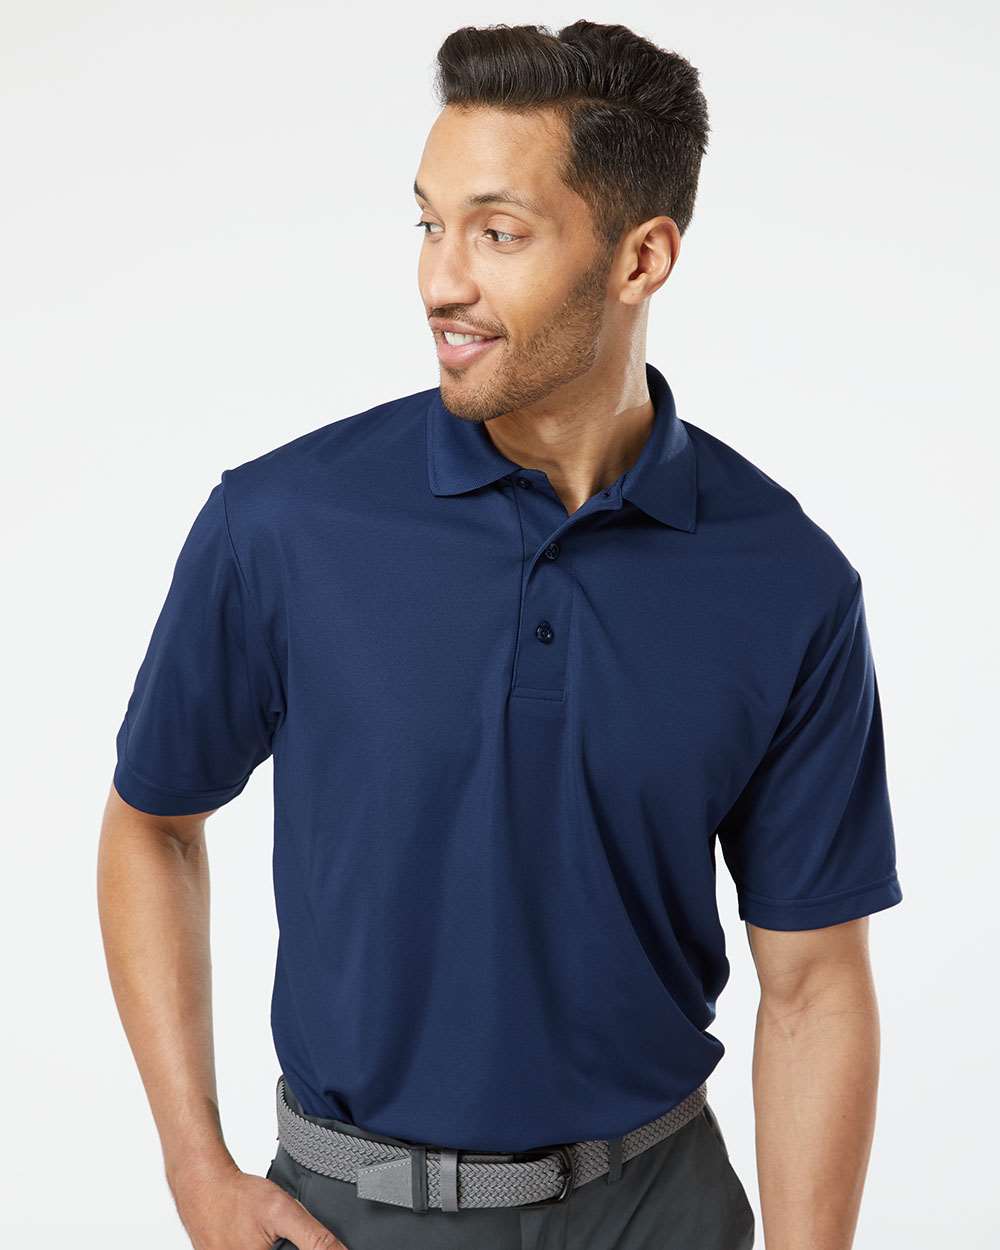 Premium Sebring Performance Polo T-shirt, Microfiber Performance Polyester  | 4 oz./yd²,100% microfiber performance polyester | Elevate your activewear